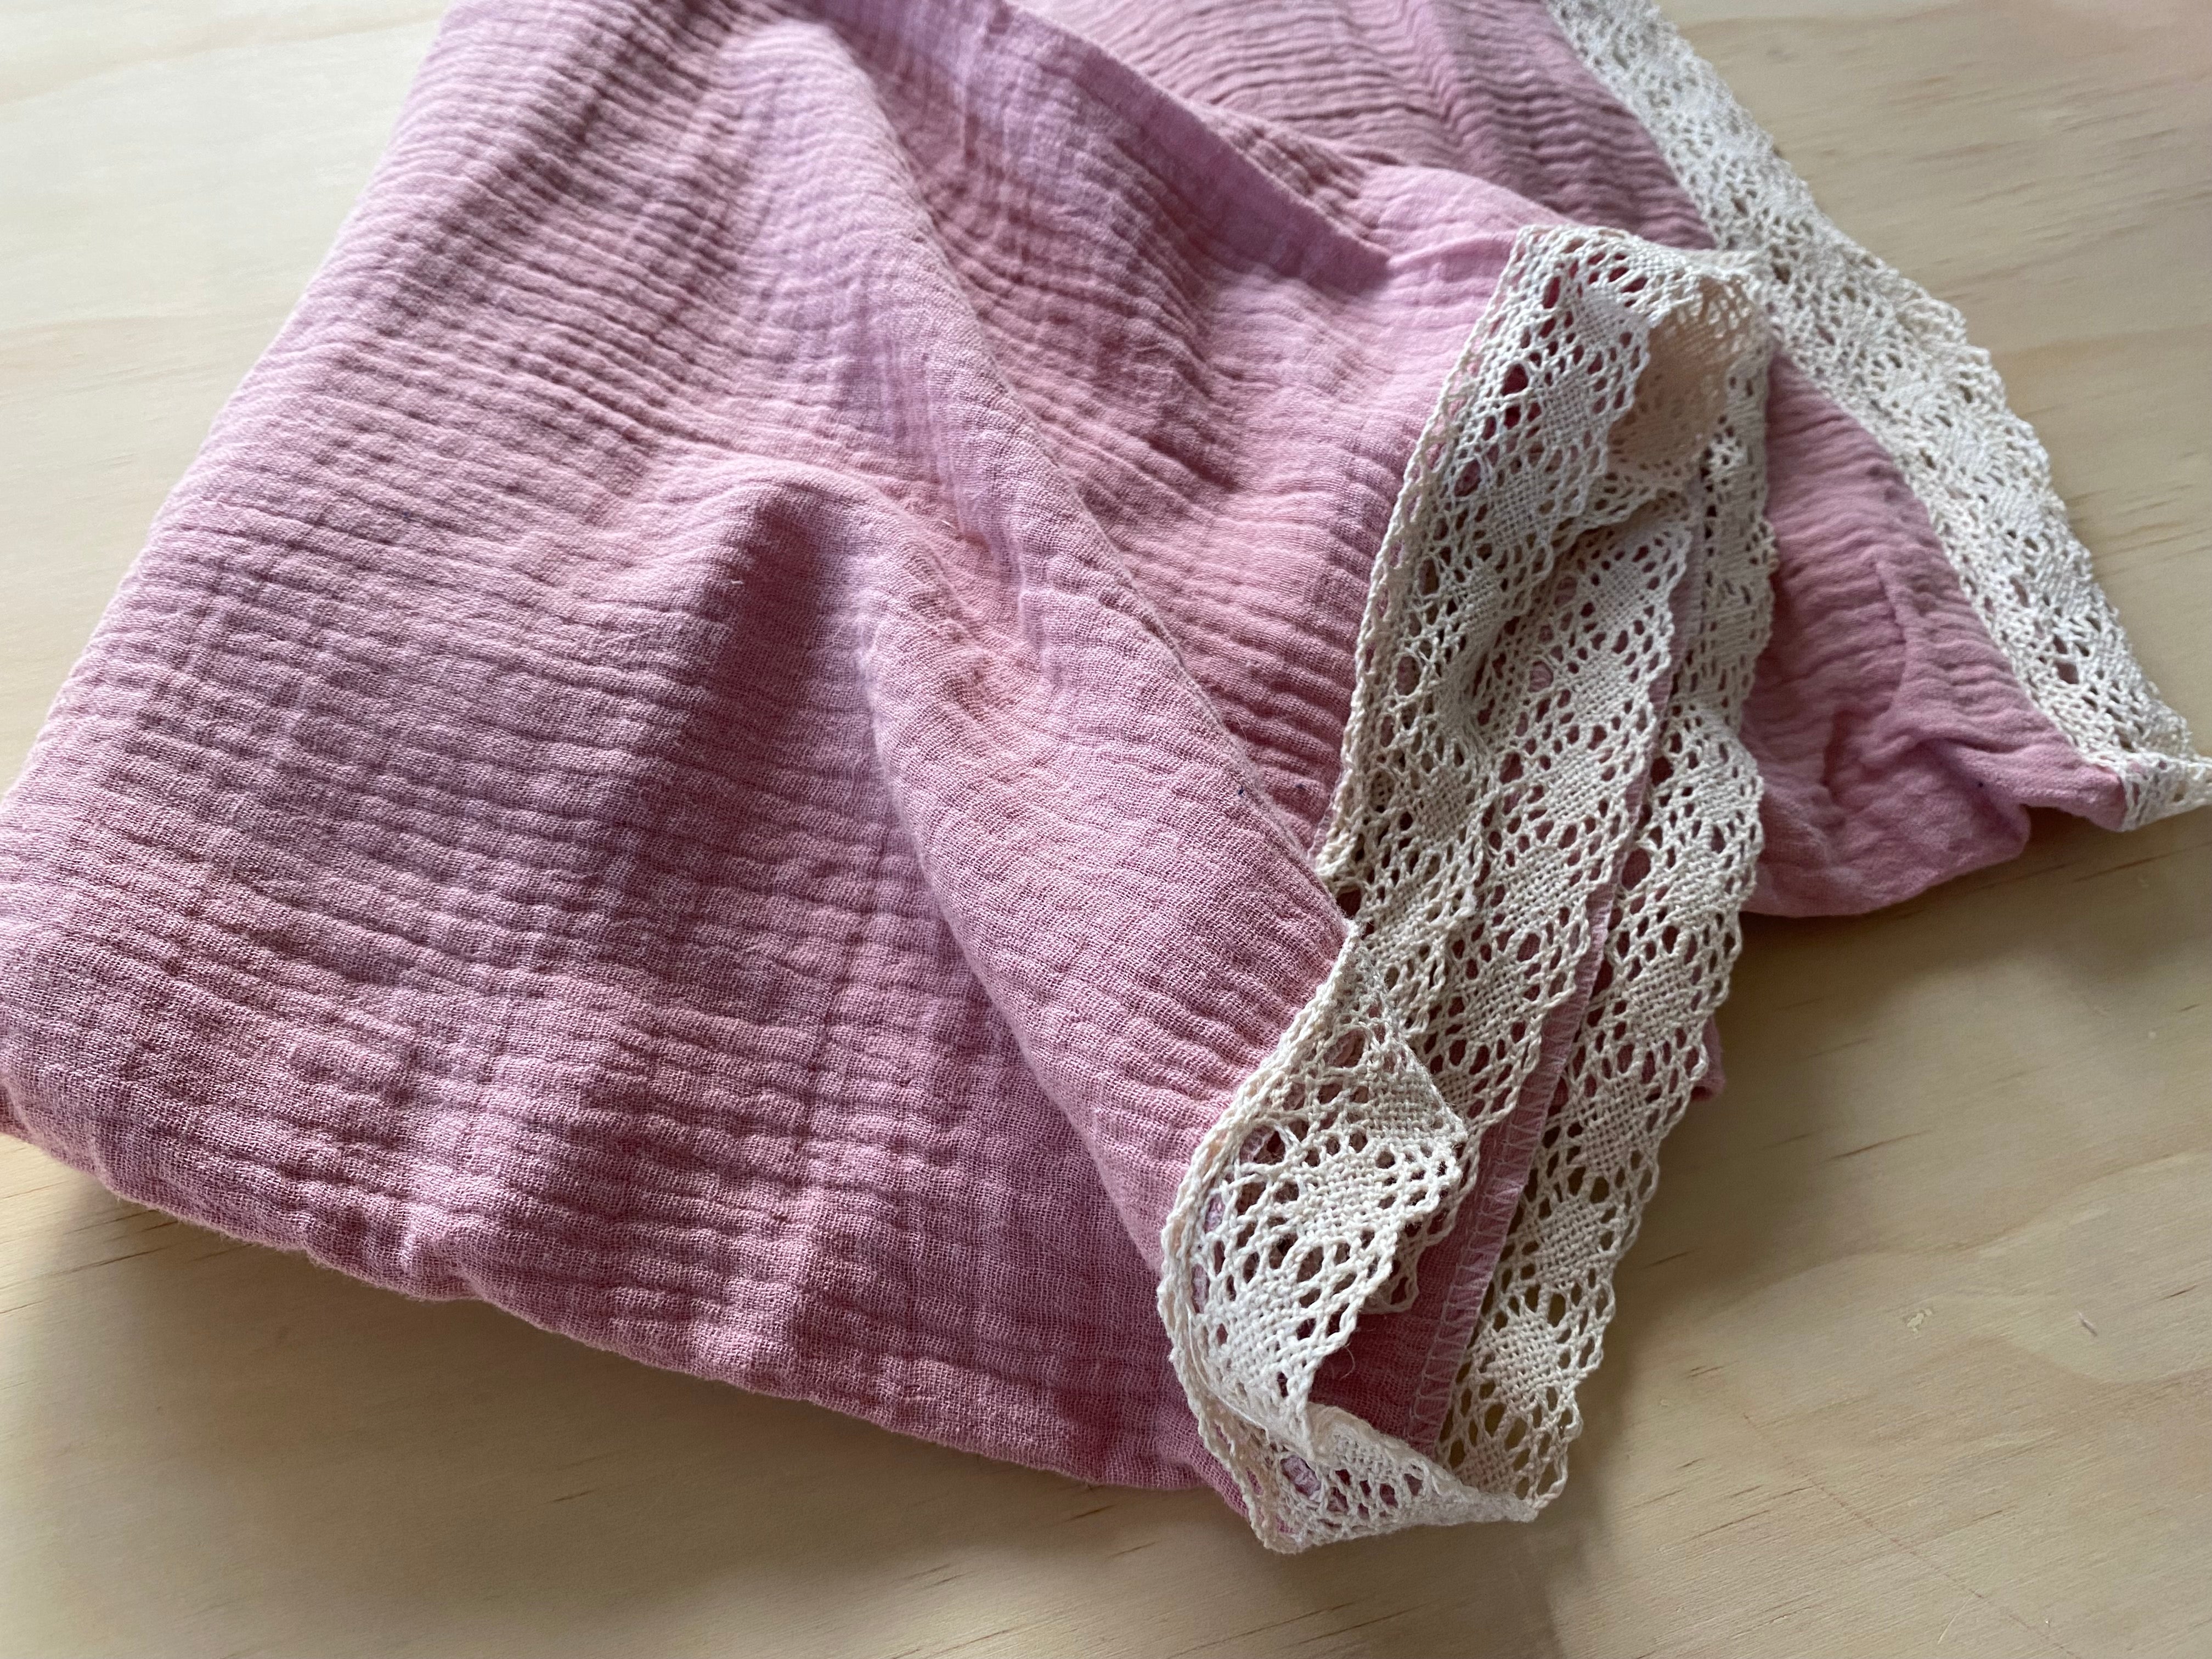 Blossom Heirloom Lace Blanket